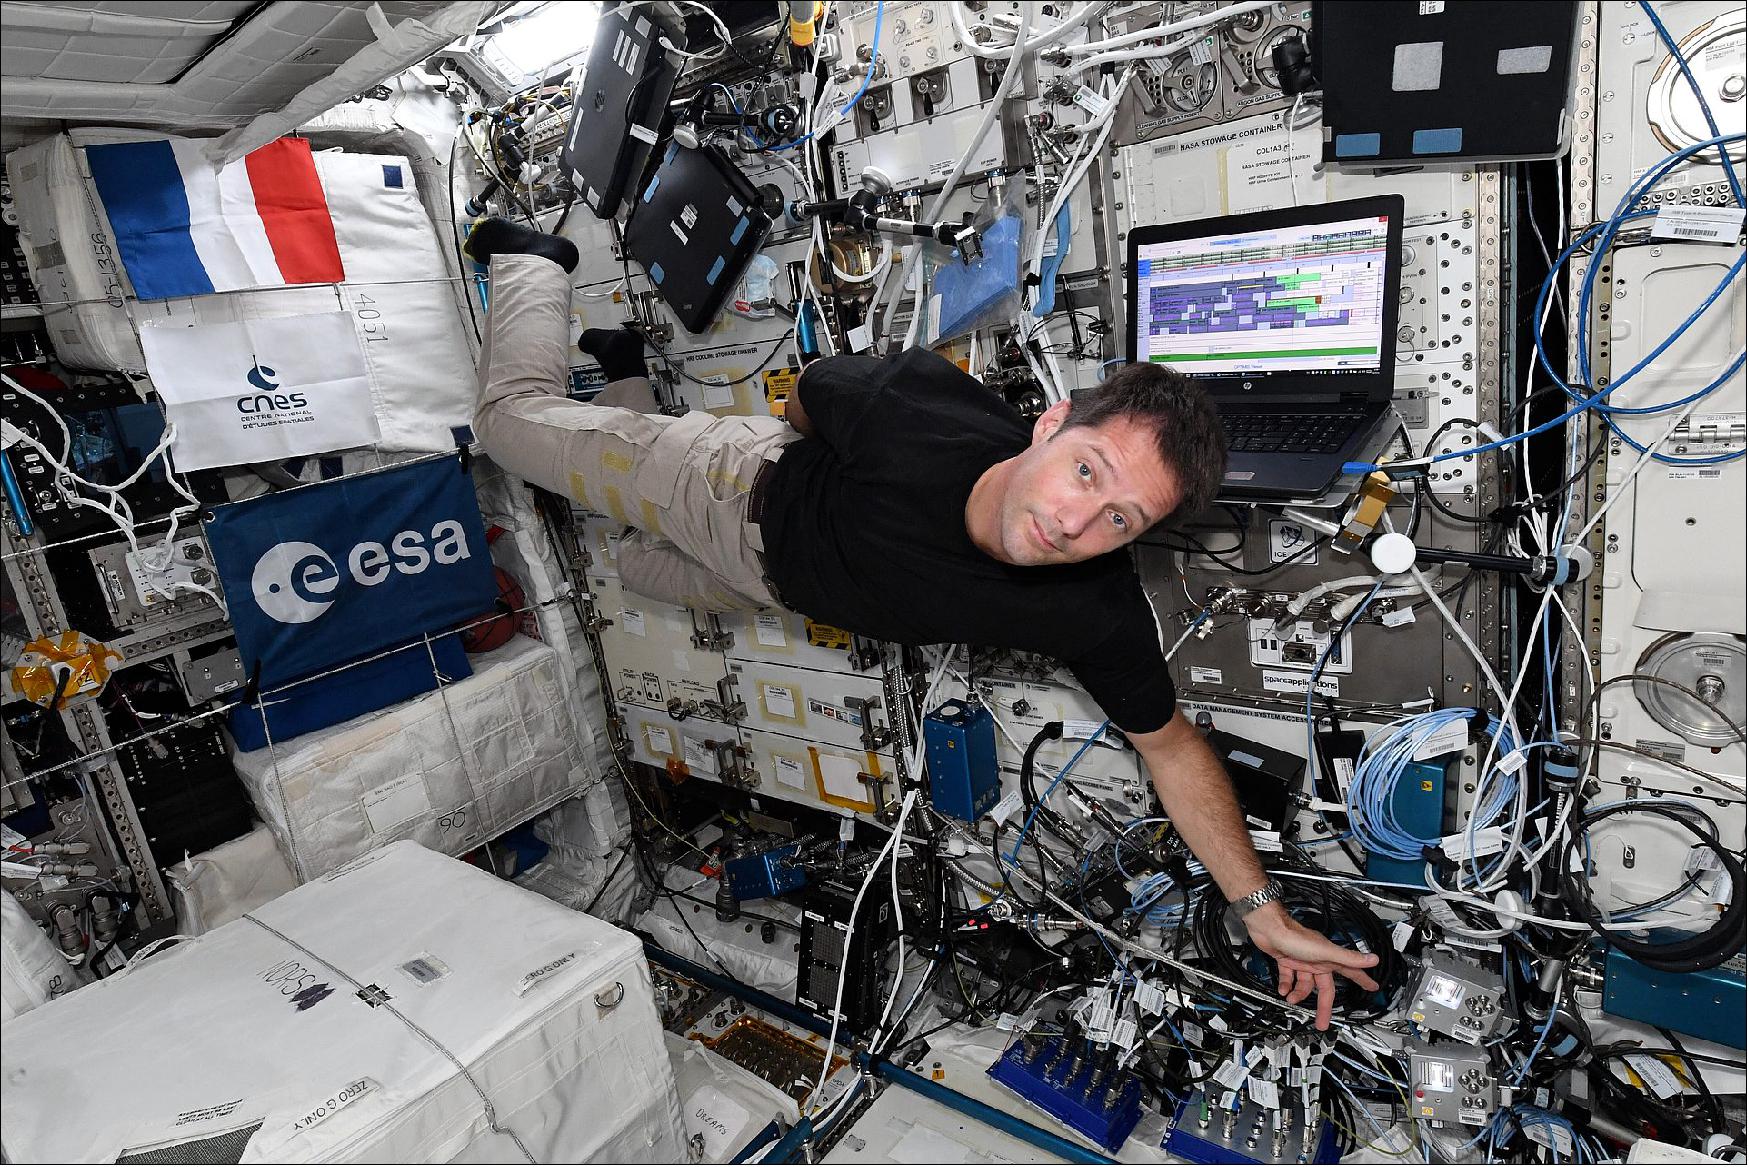 Figure 7: ESA Astronaut Thomas Pesquet with Astro Pis Ed and Izzy on board the ISS (image credit: ESA)